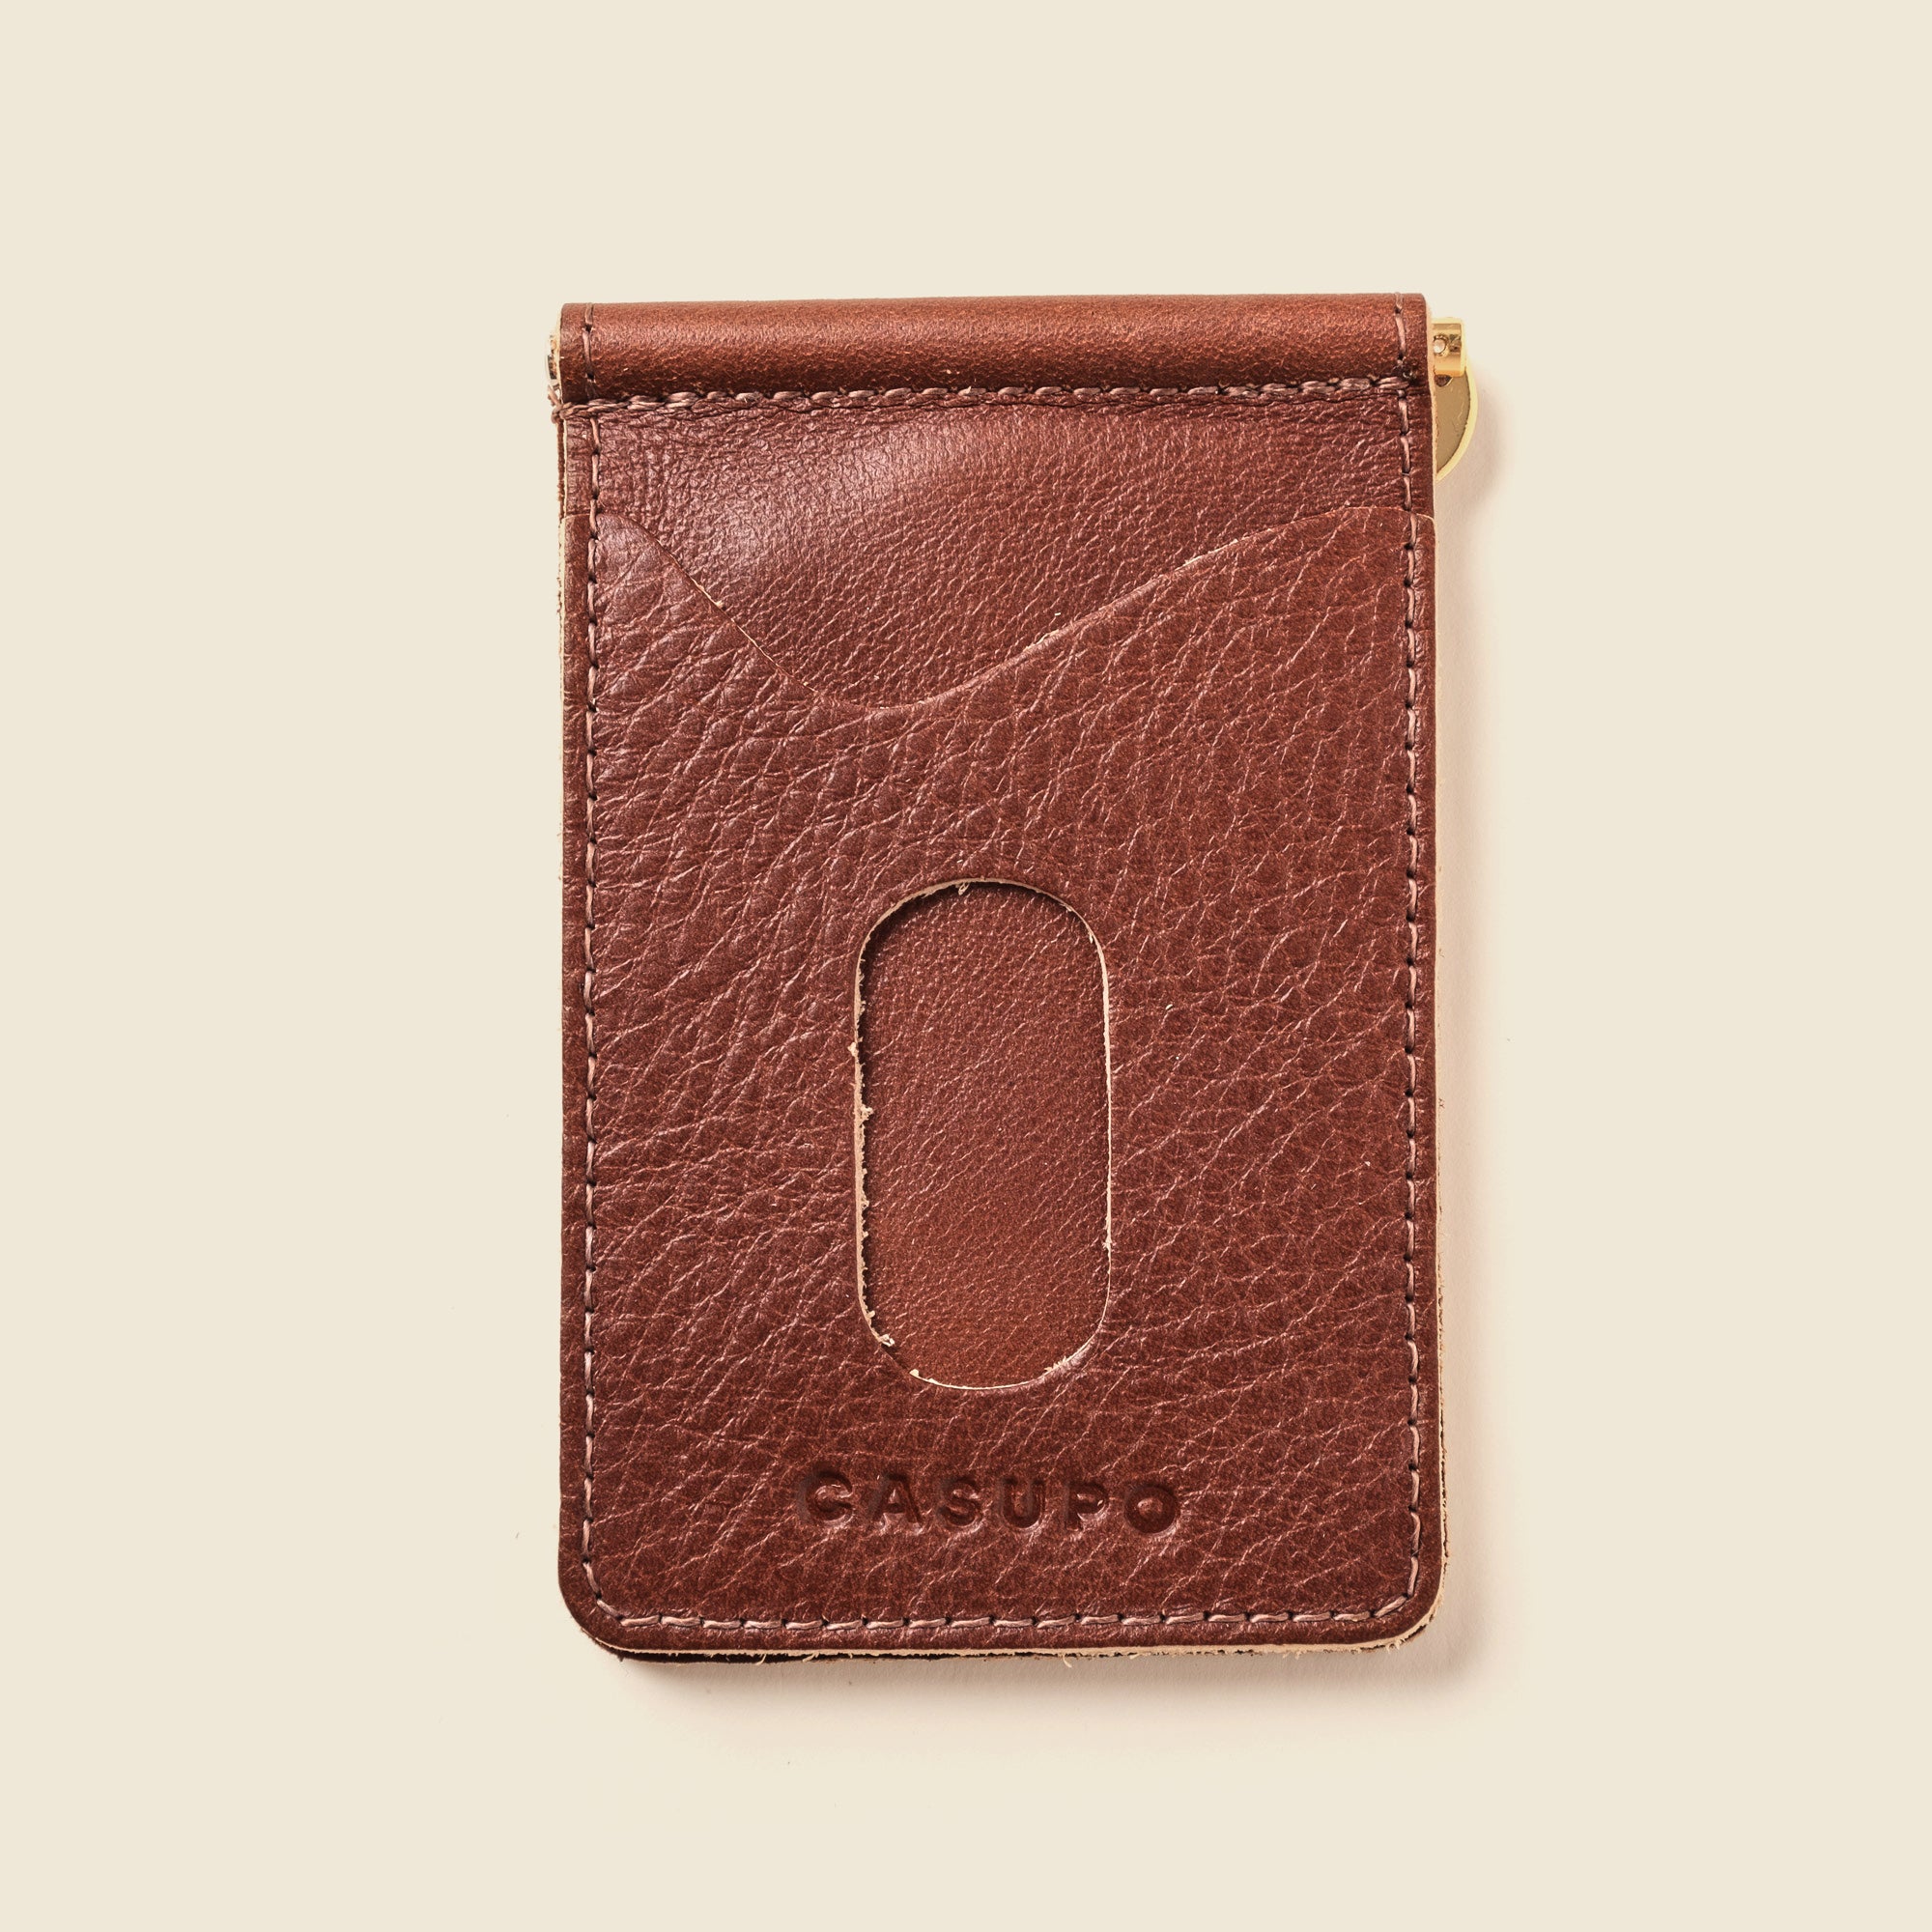 Brown leather wallet with money clip